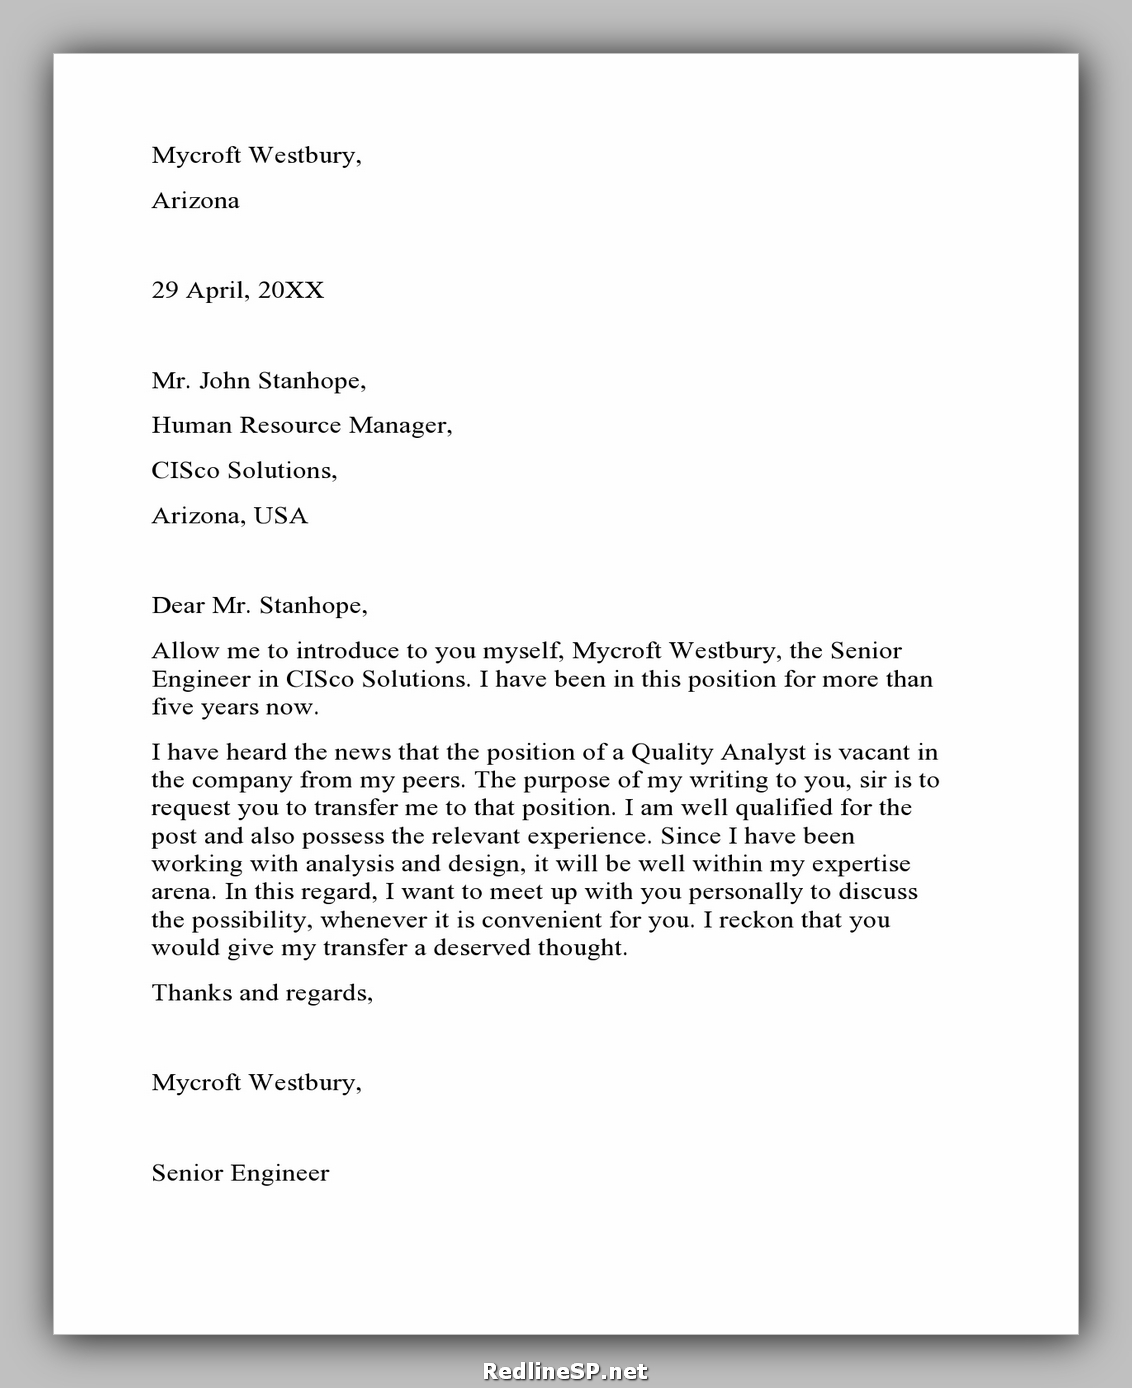 Job transfer letters from employer to employee